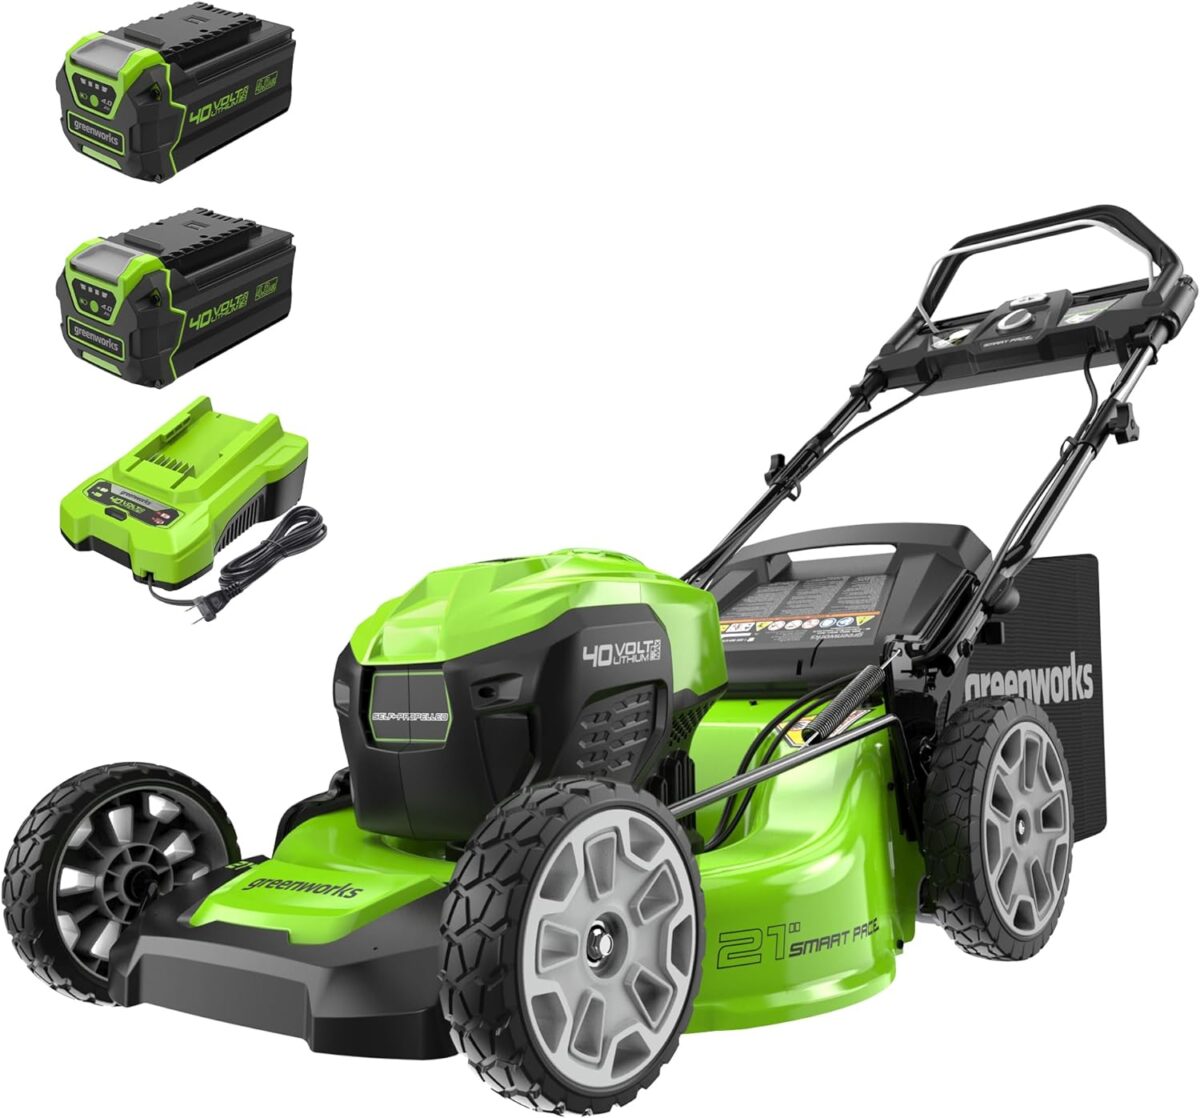 Save 20% on a Greenworks 40V 21-inch Lawn Mower Kit!